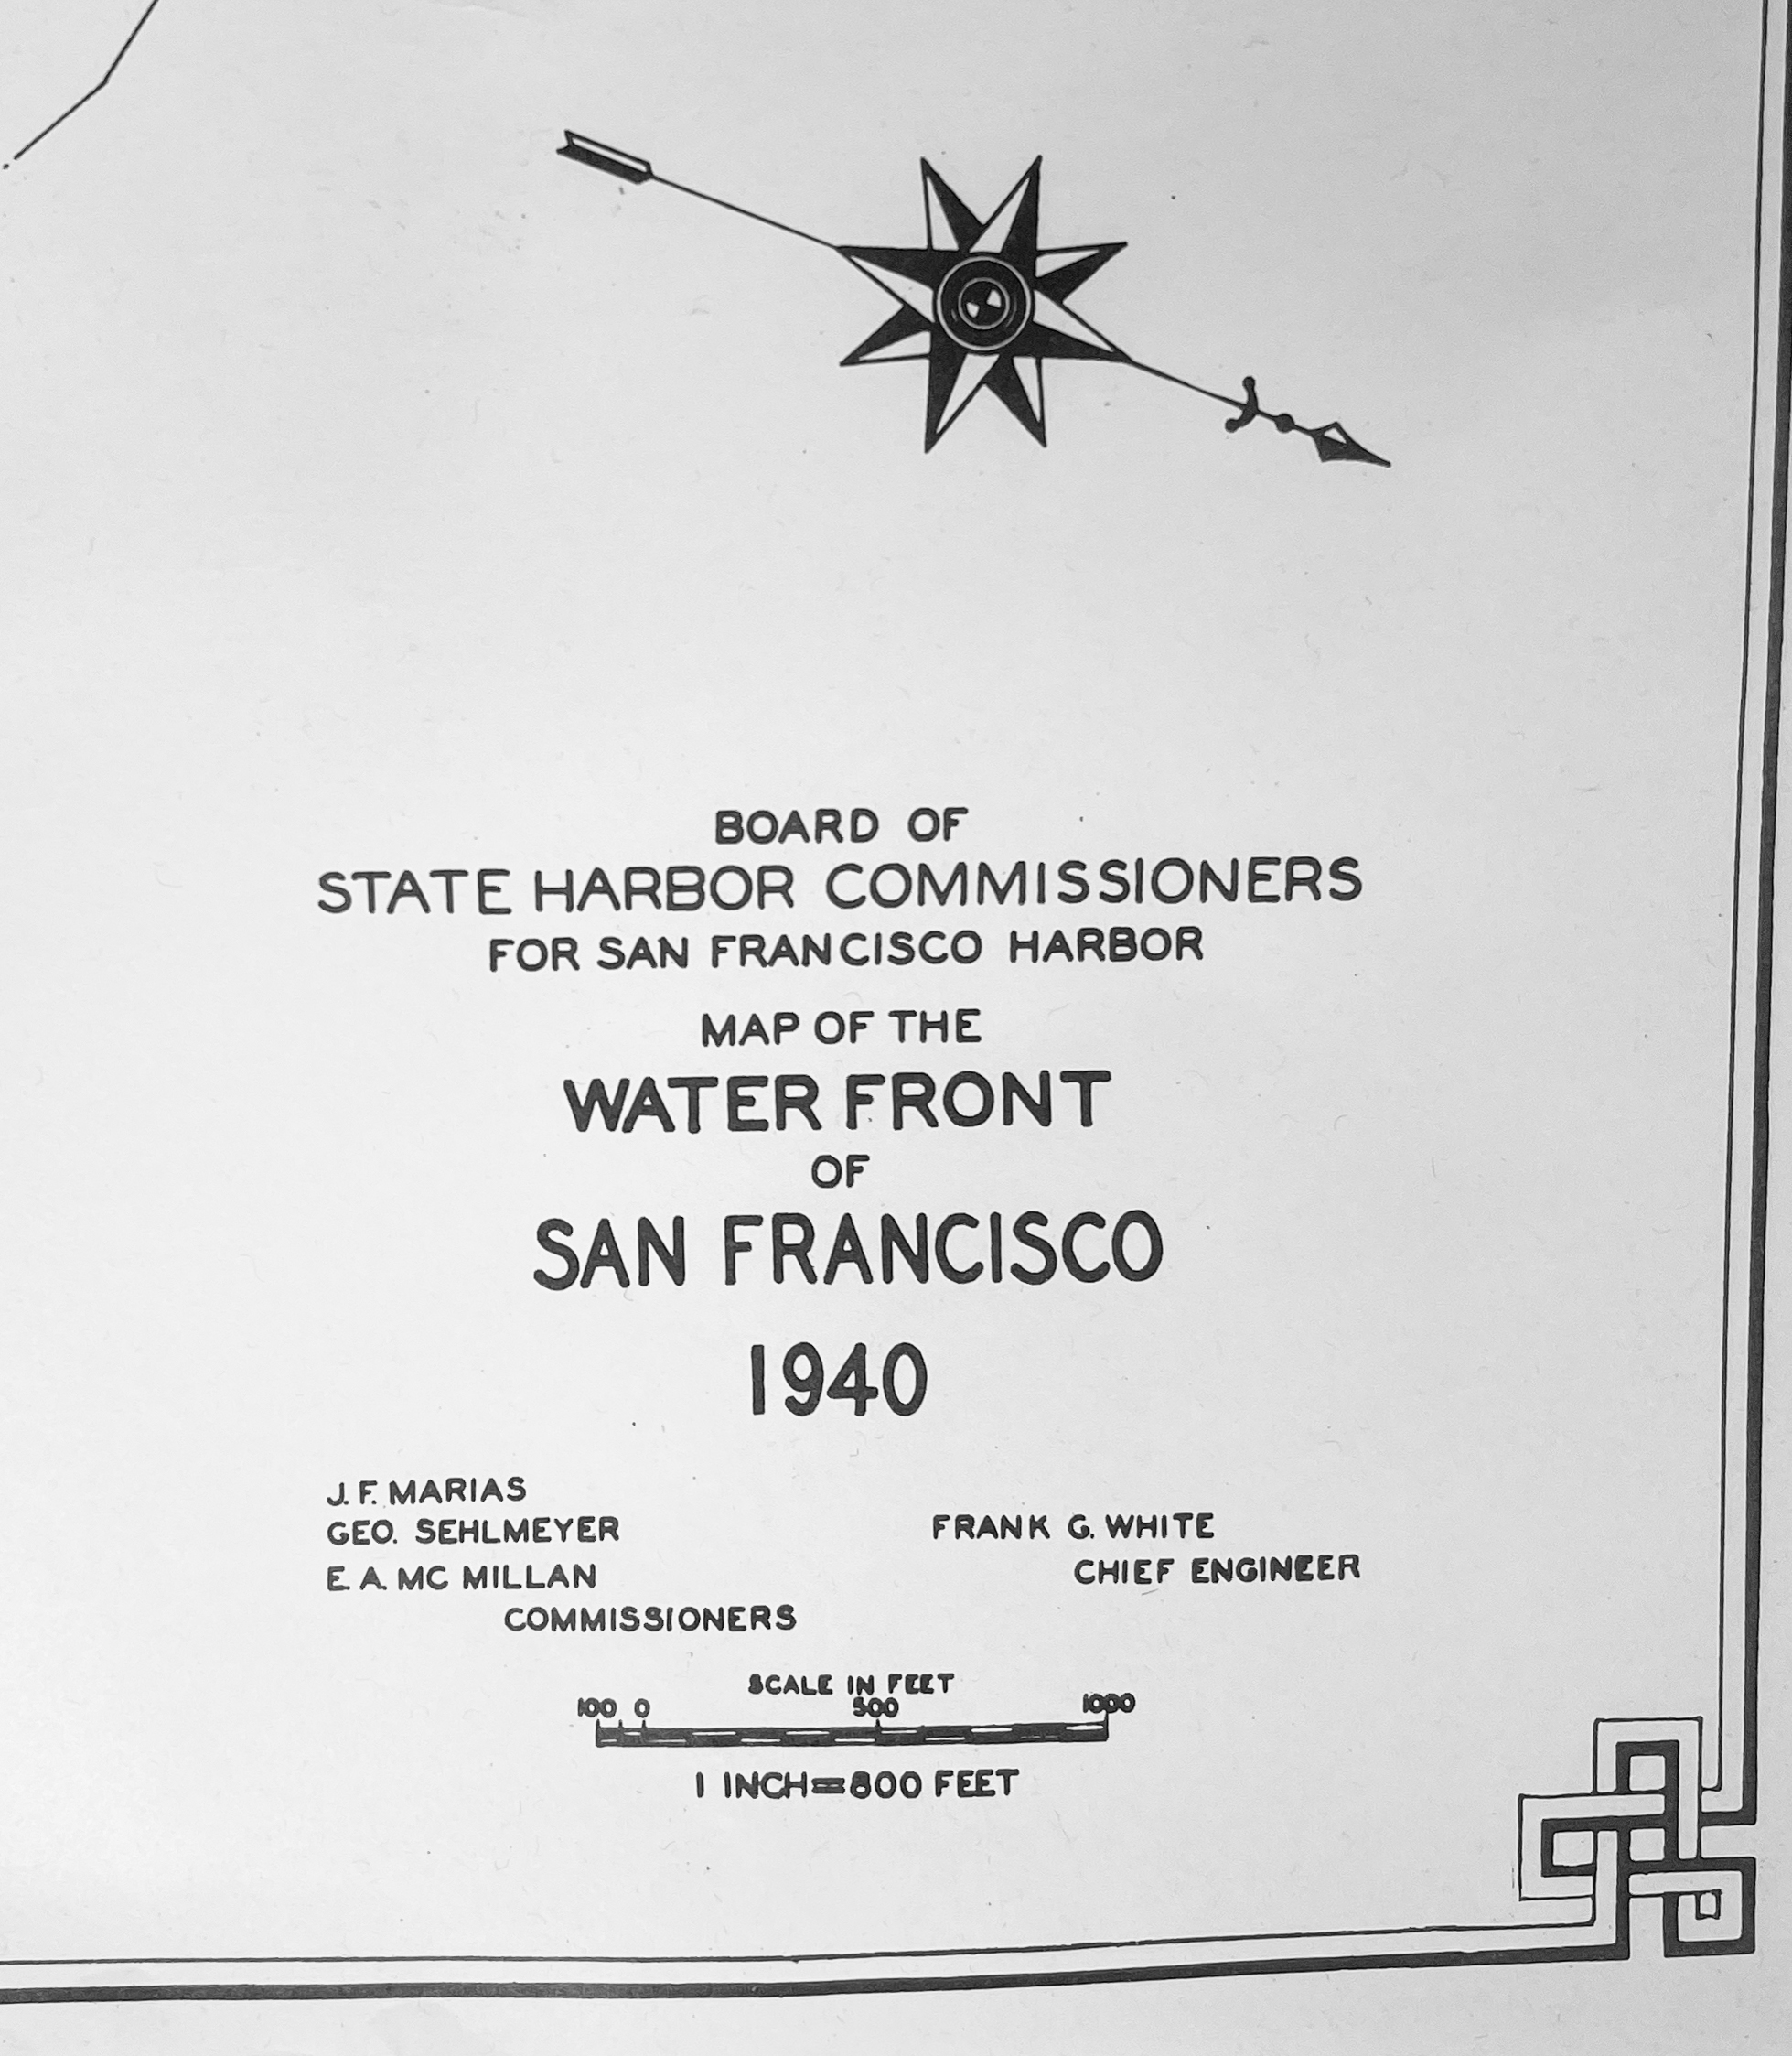 Close-up detail from the title of the Map of the Waterfront of San Francisco 1940 by SF Harbor Commissioners